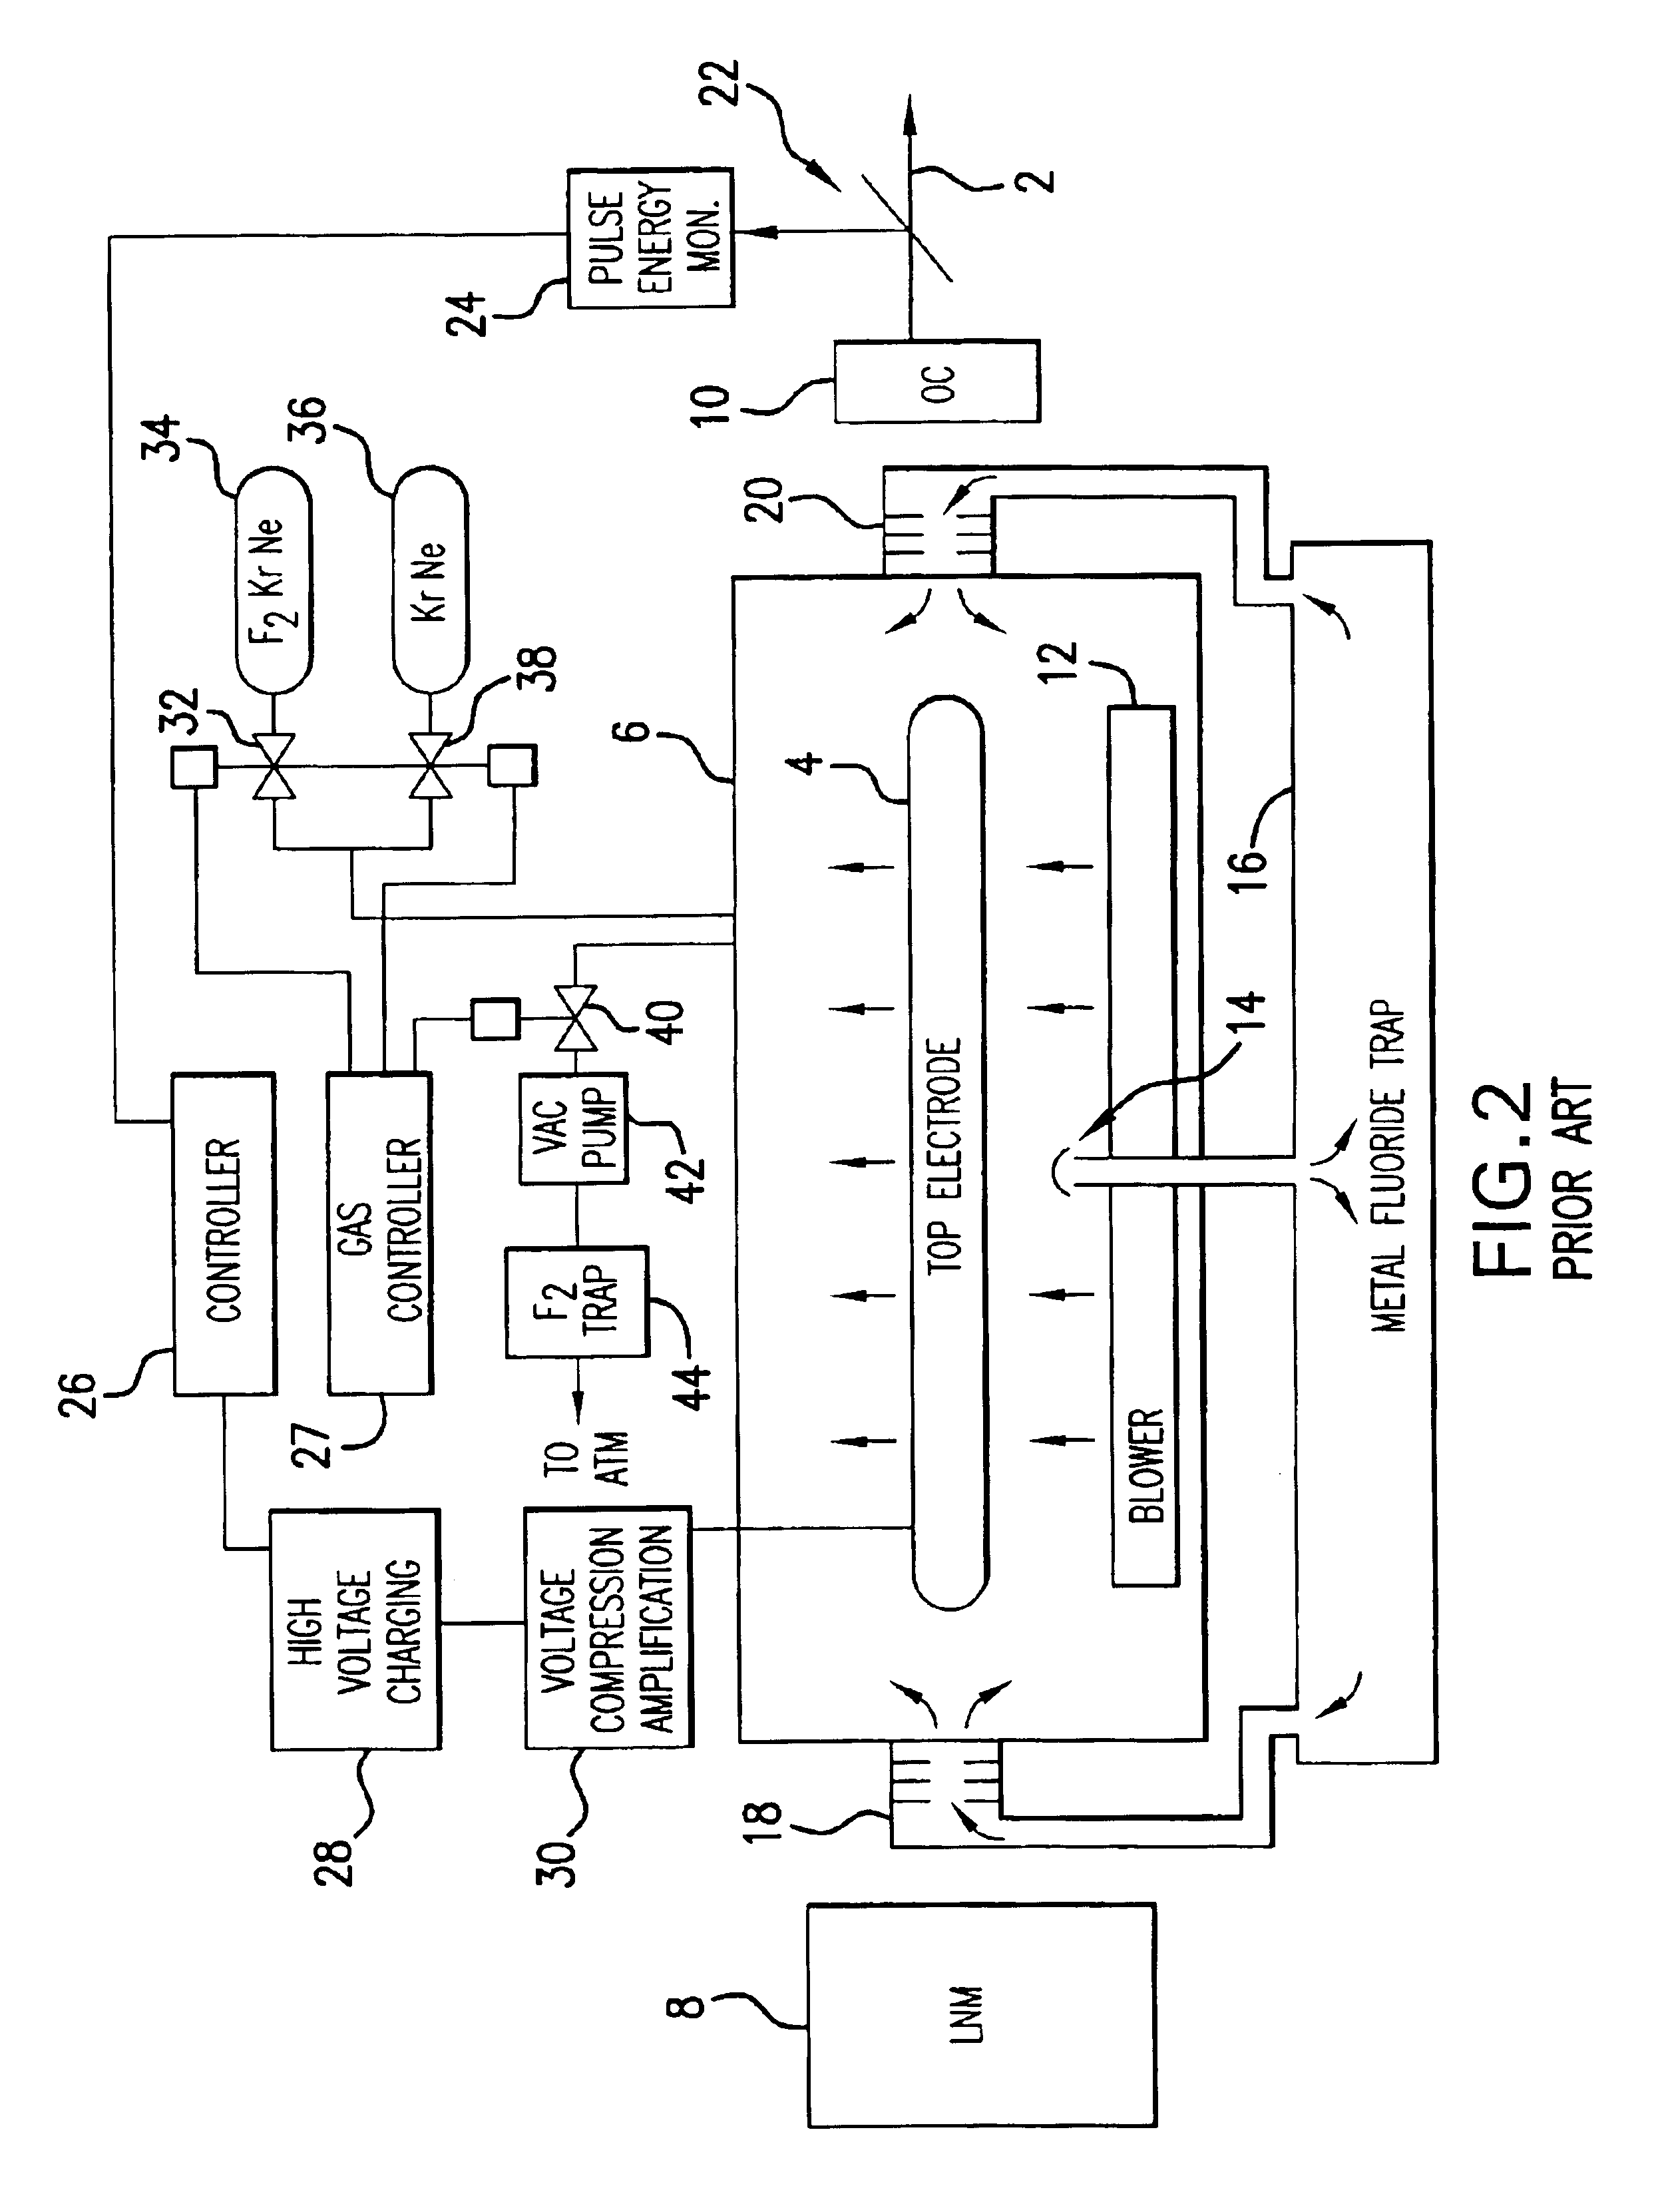 Automatic gas control system for a gas discharge laser